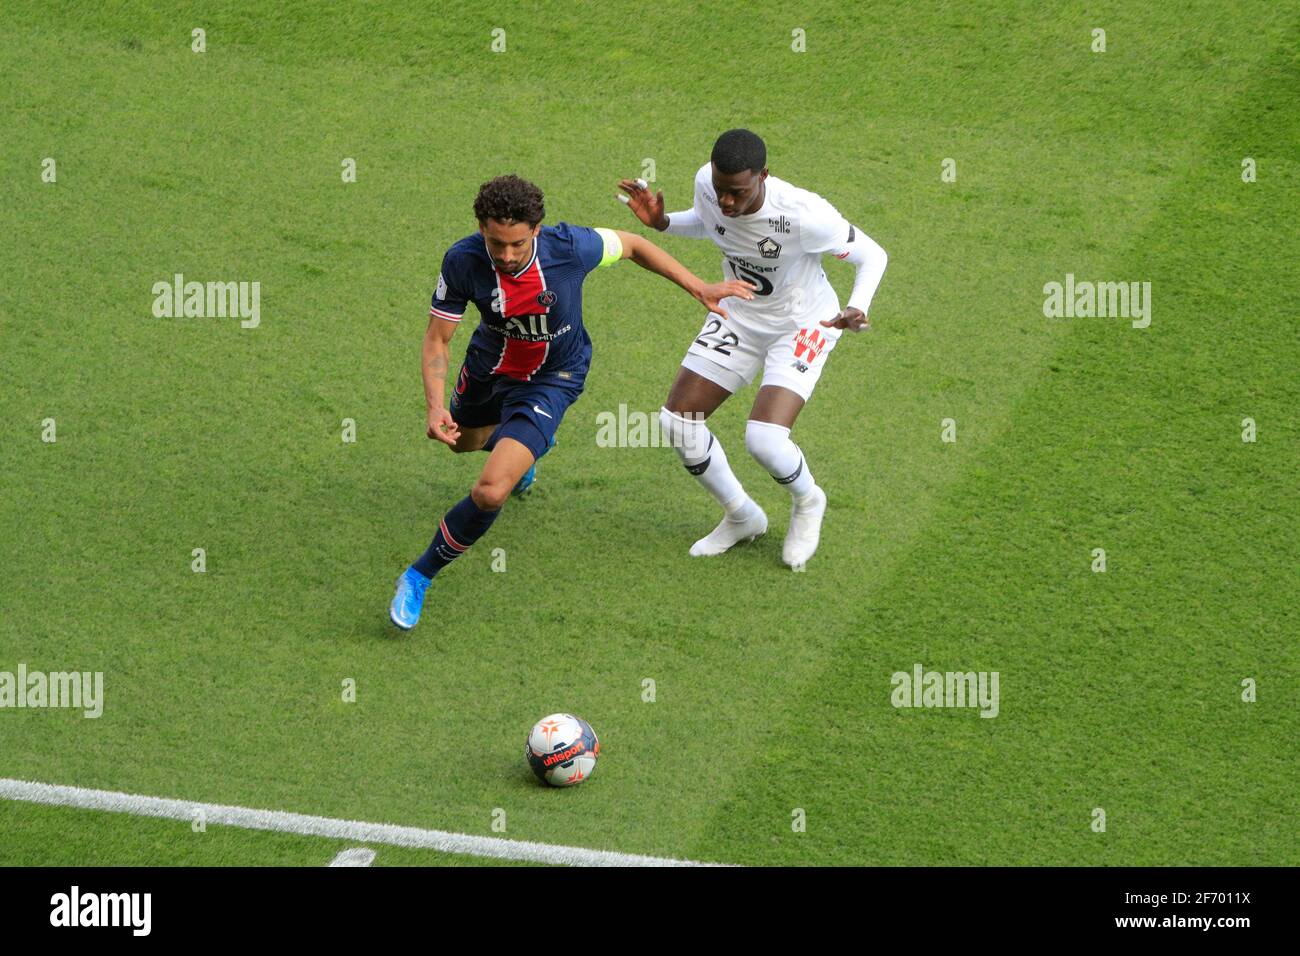 Marcos Aoas Correa, Marquinhos (PSG) and Timothy WEAH (Lille OSC) battled for the ball during the French championship Ligue 1 football match between Paris Saint-Germain and LOSC Lille on April 3, 2021